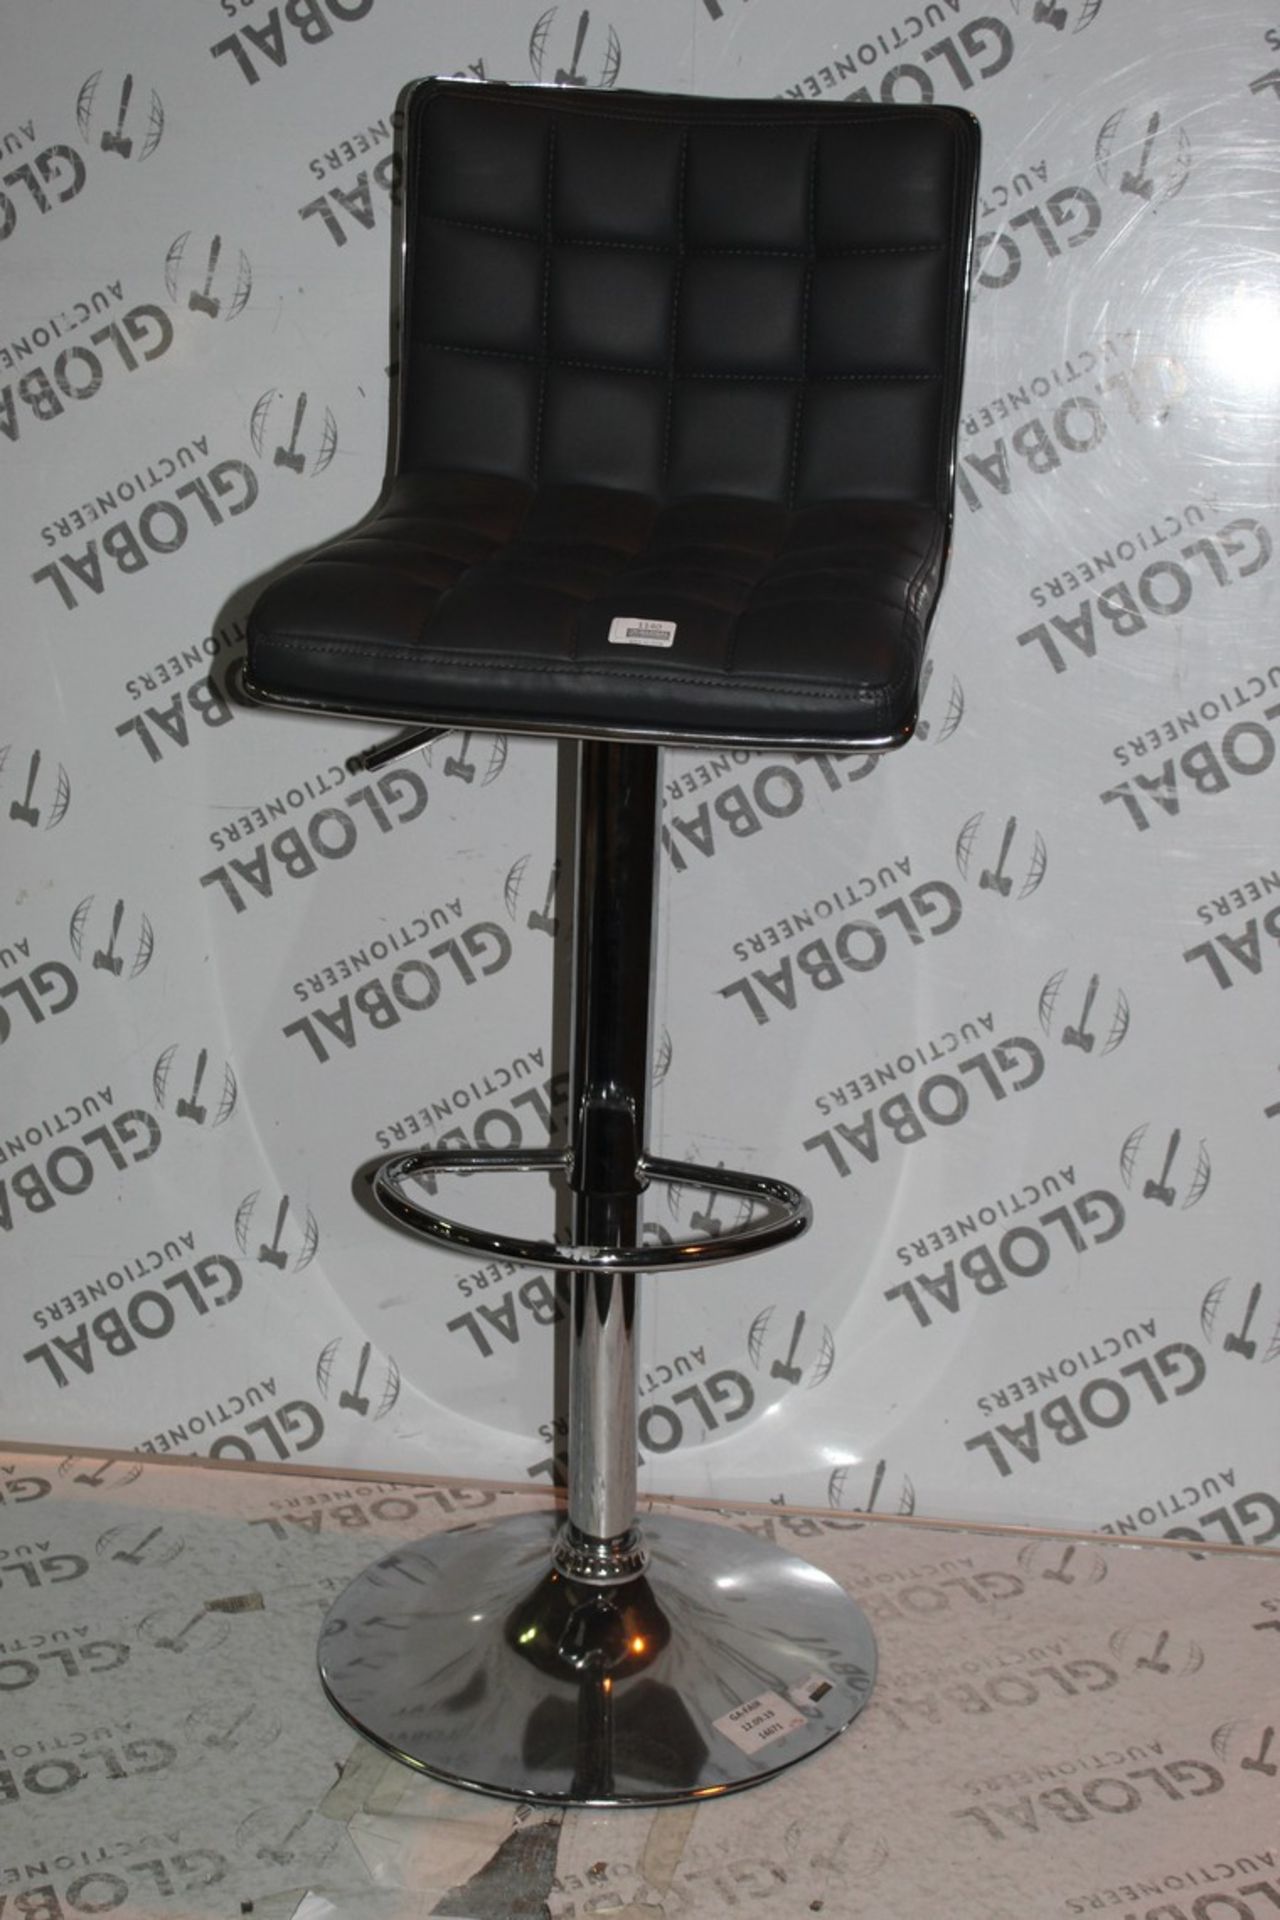 Stainless Steel and Chrome Freestanding Swivel Bar Stool RRP £75 (14671) (Public Viewing and